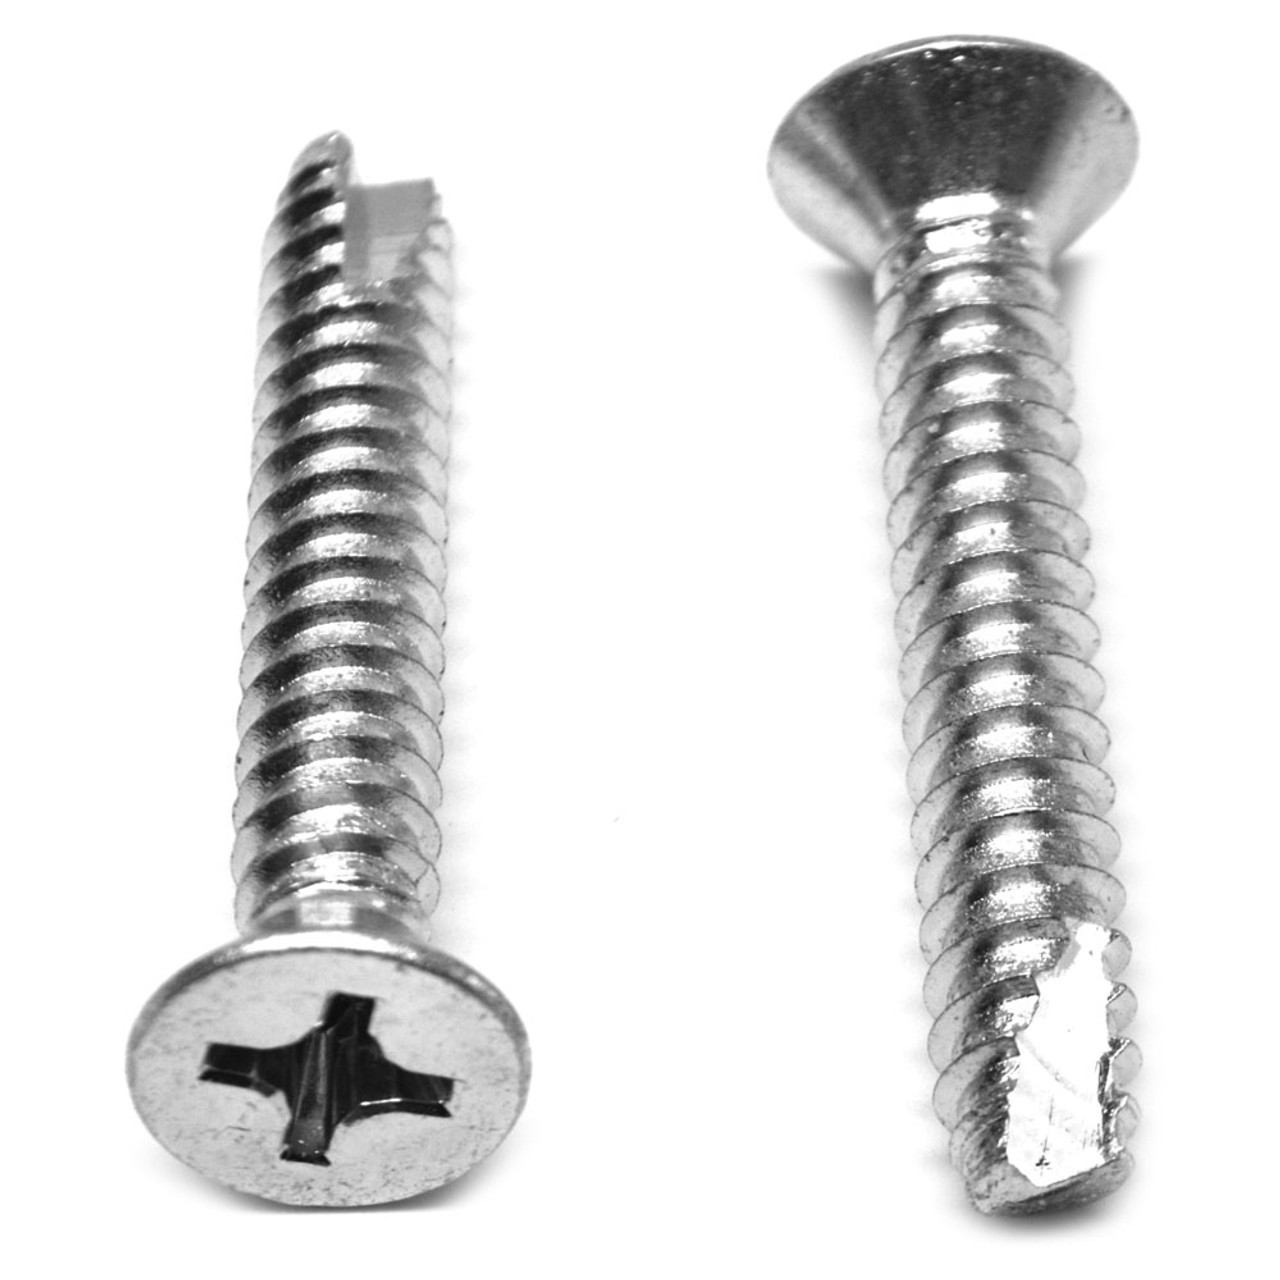 Slotted Oval Head Sheet Metal Screw Stainless Steel #8 x 3" Qty 25 